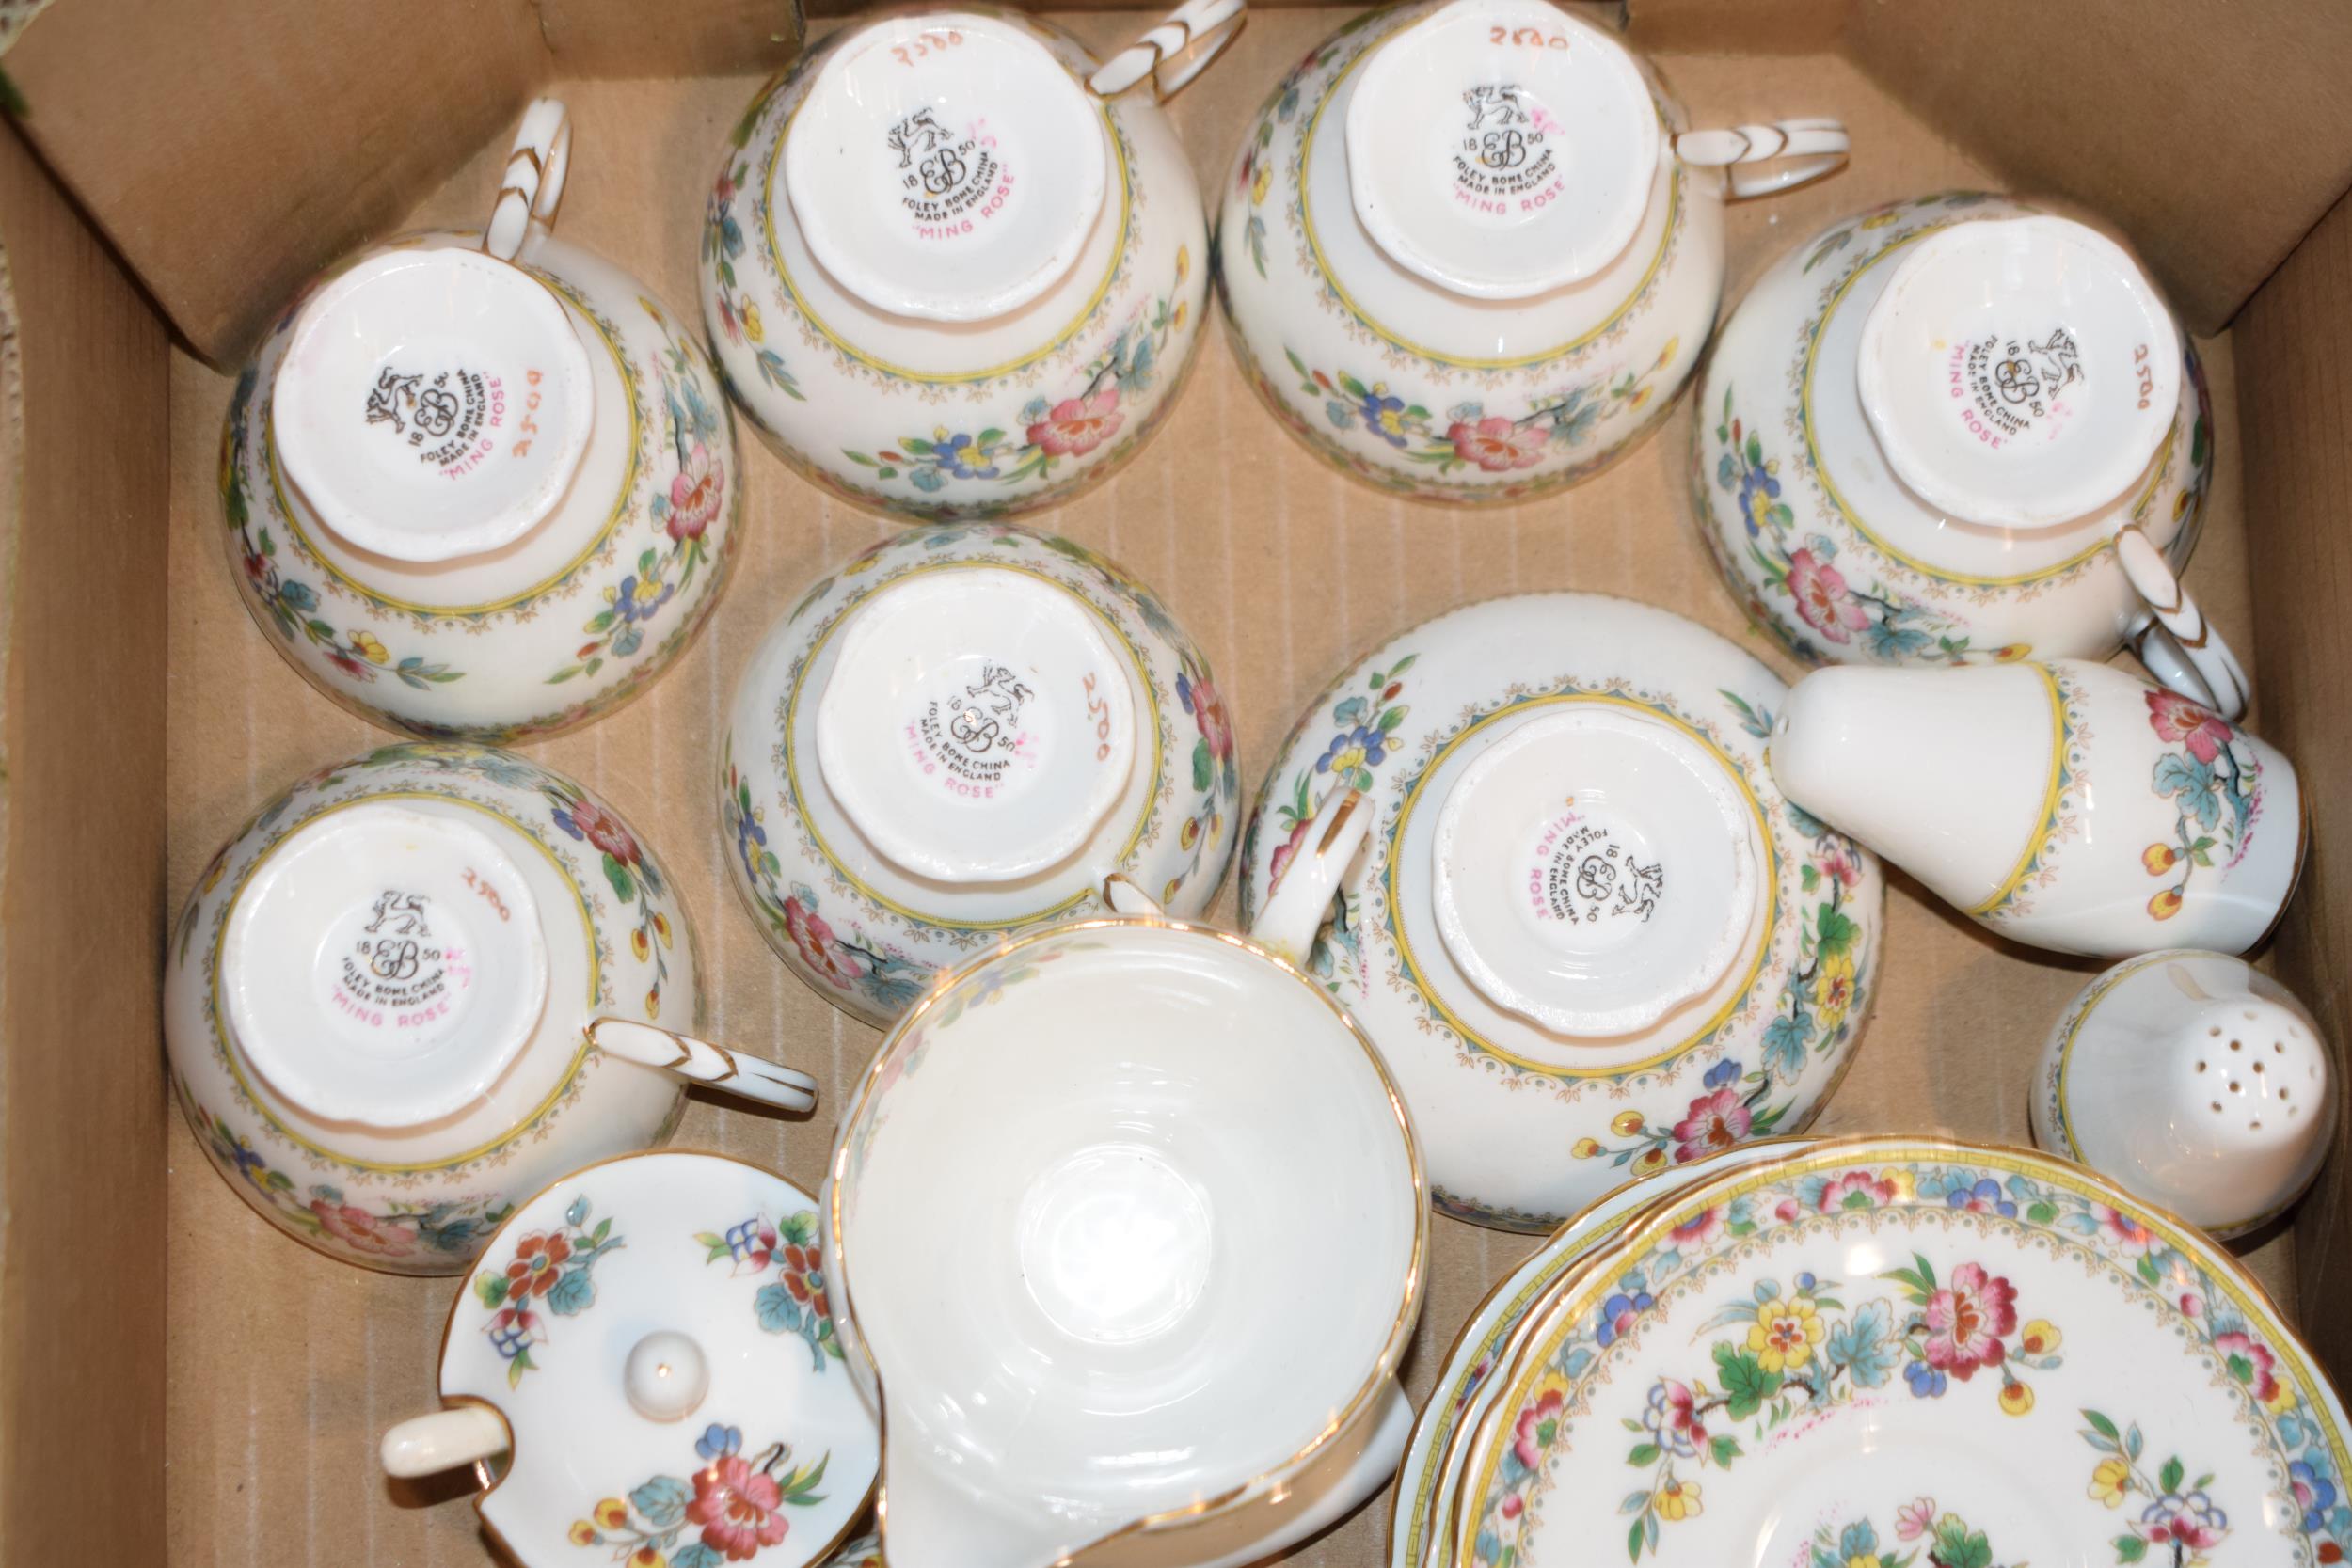 Coalport 'Ming Rose' tea service to include six cups and saucers, teapot, milk and sugar bowl - Image 2 of 3